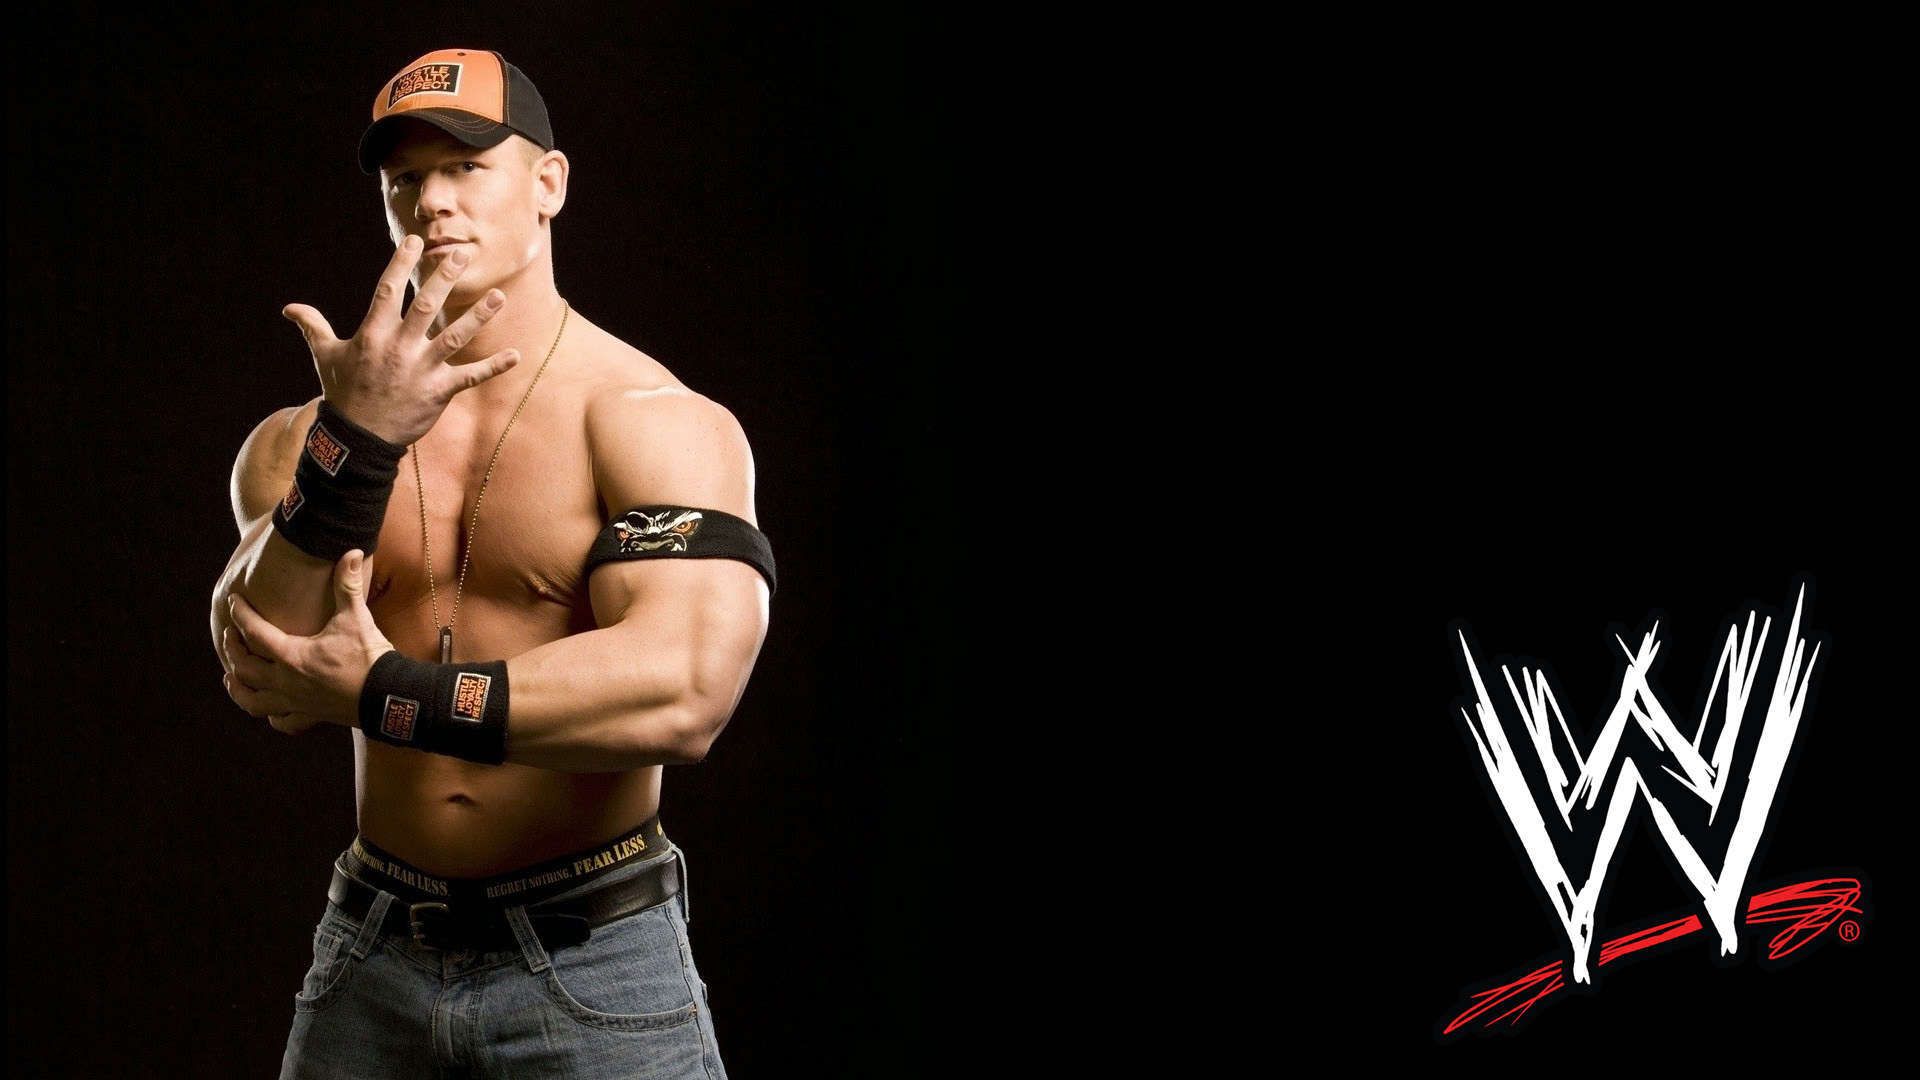 Wwe HD Wallpaper Picture Image